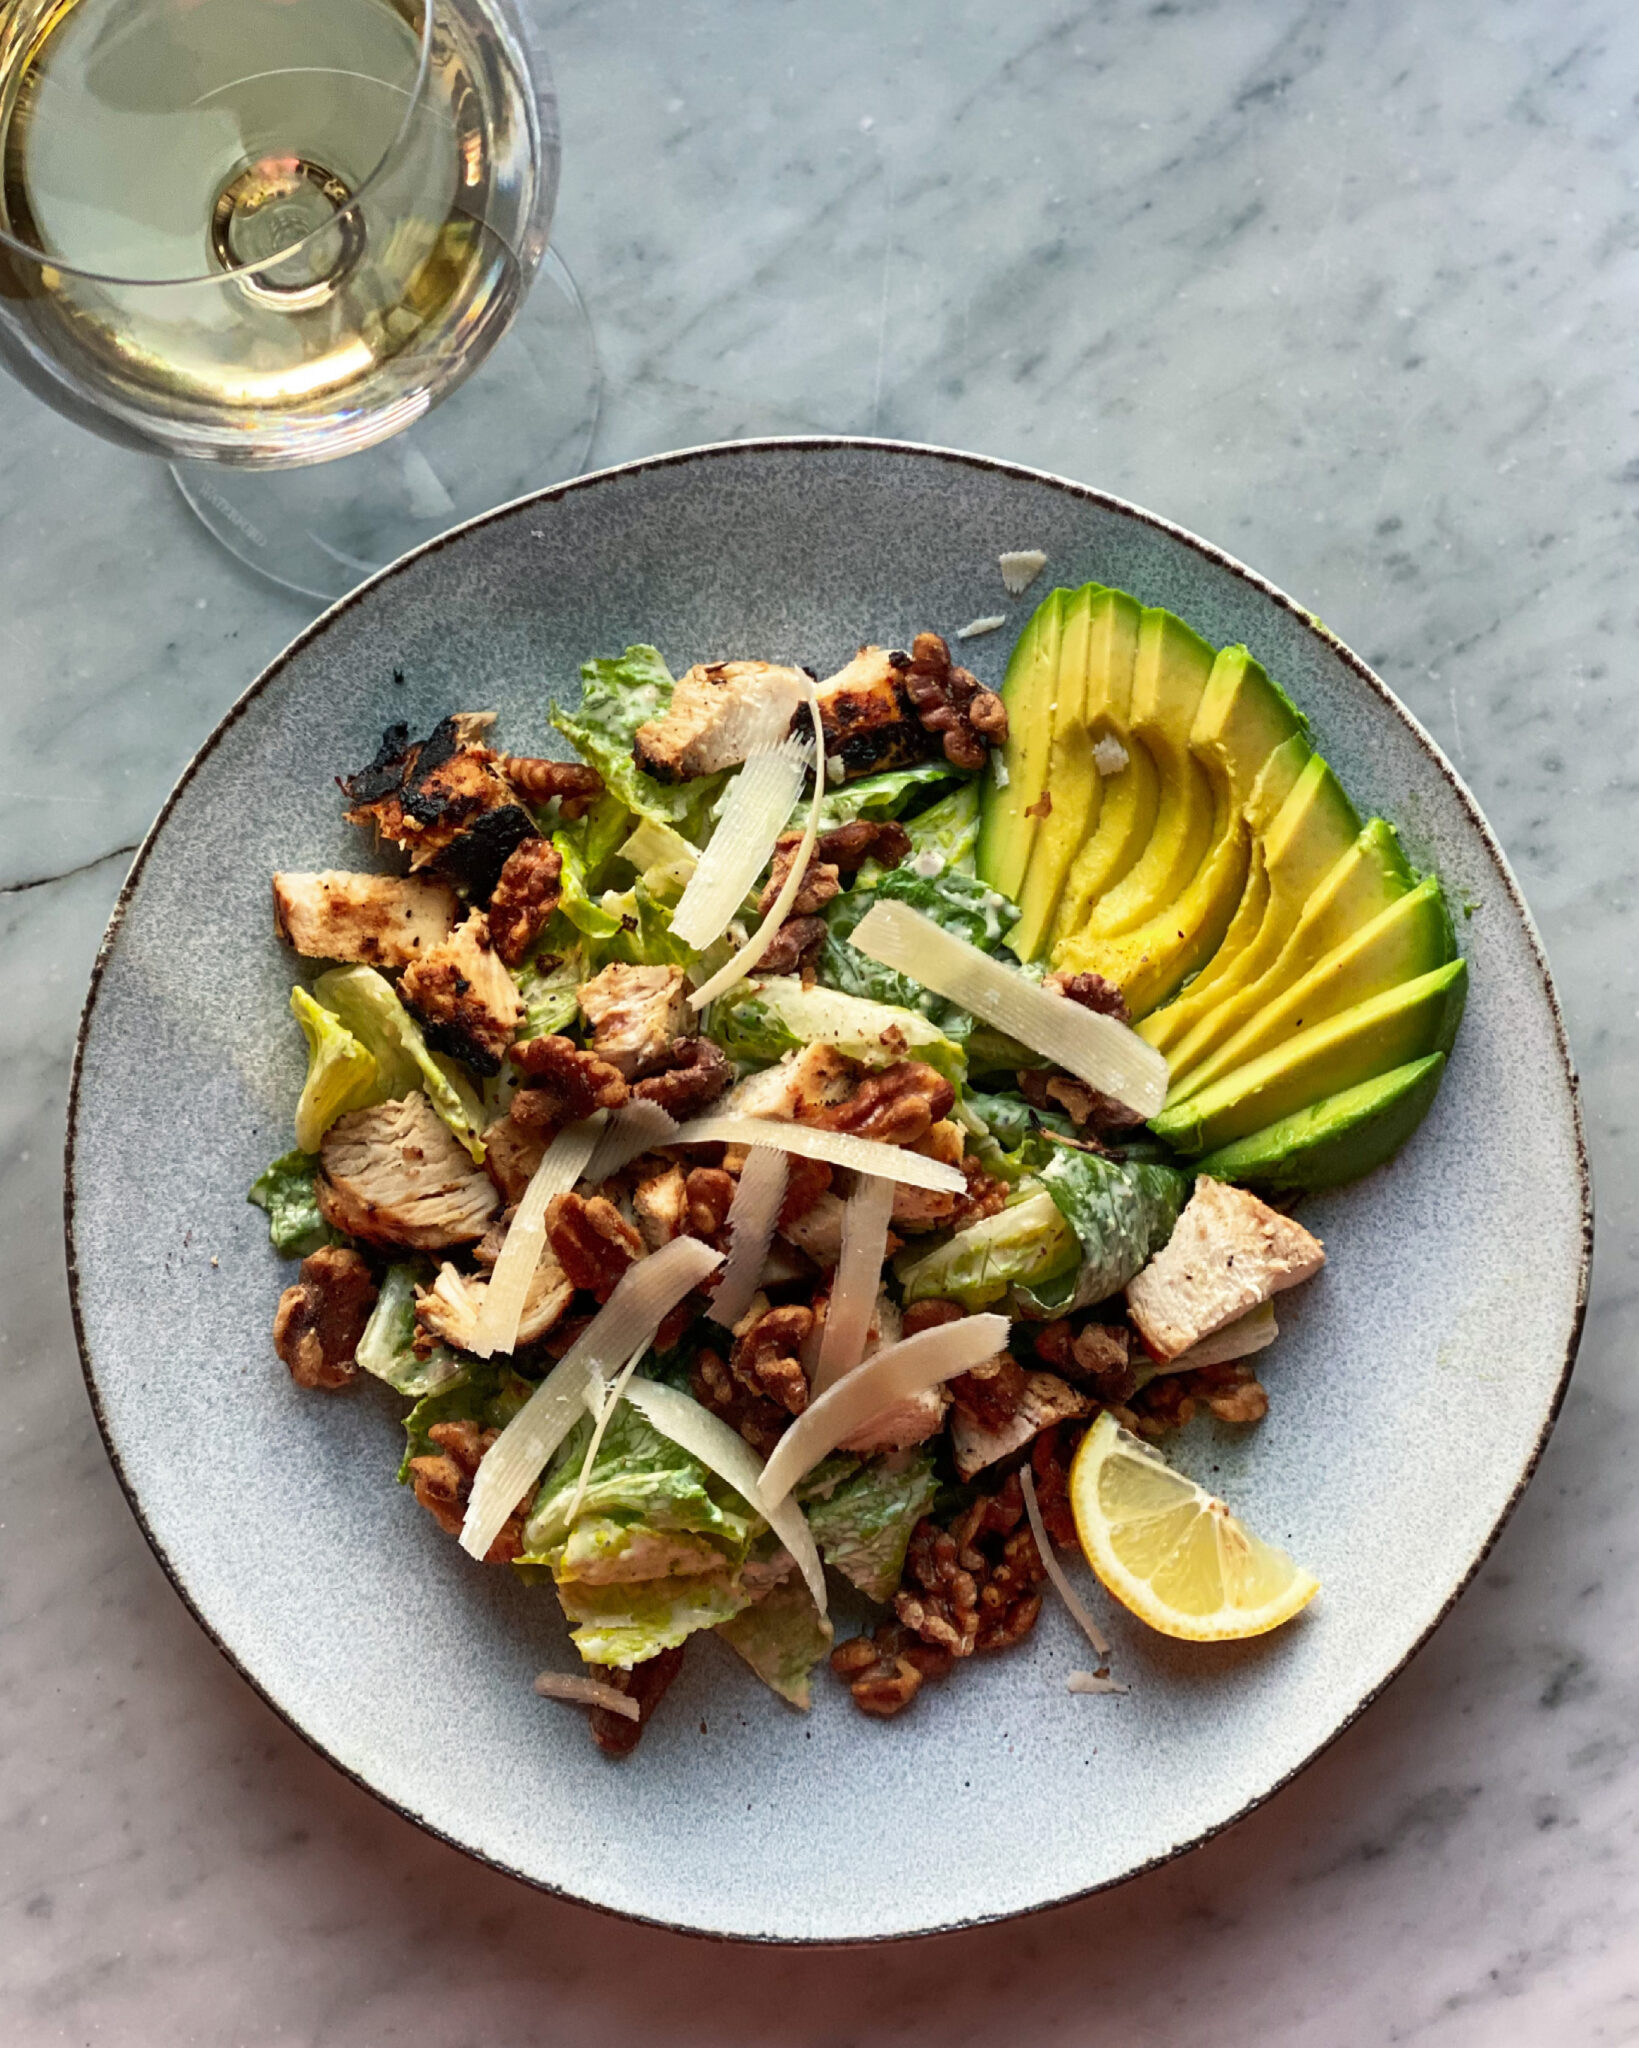 Caesar salad with avocado and walnuts and chicken